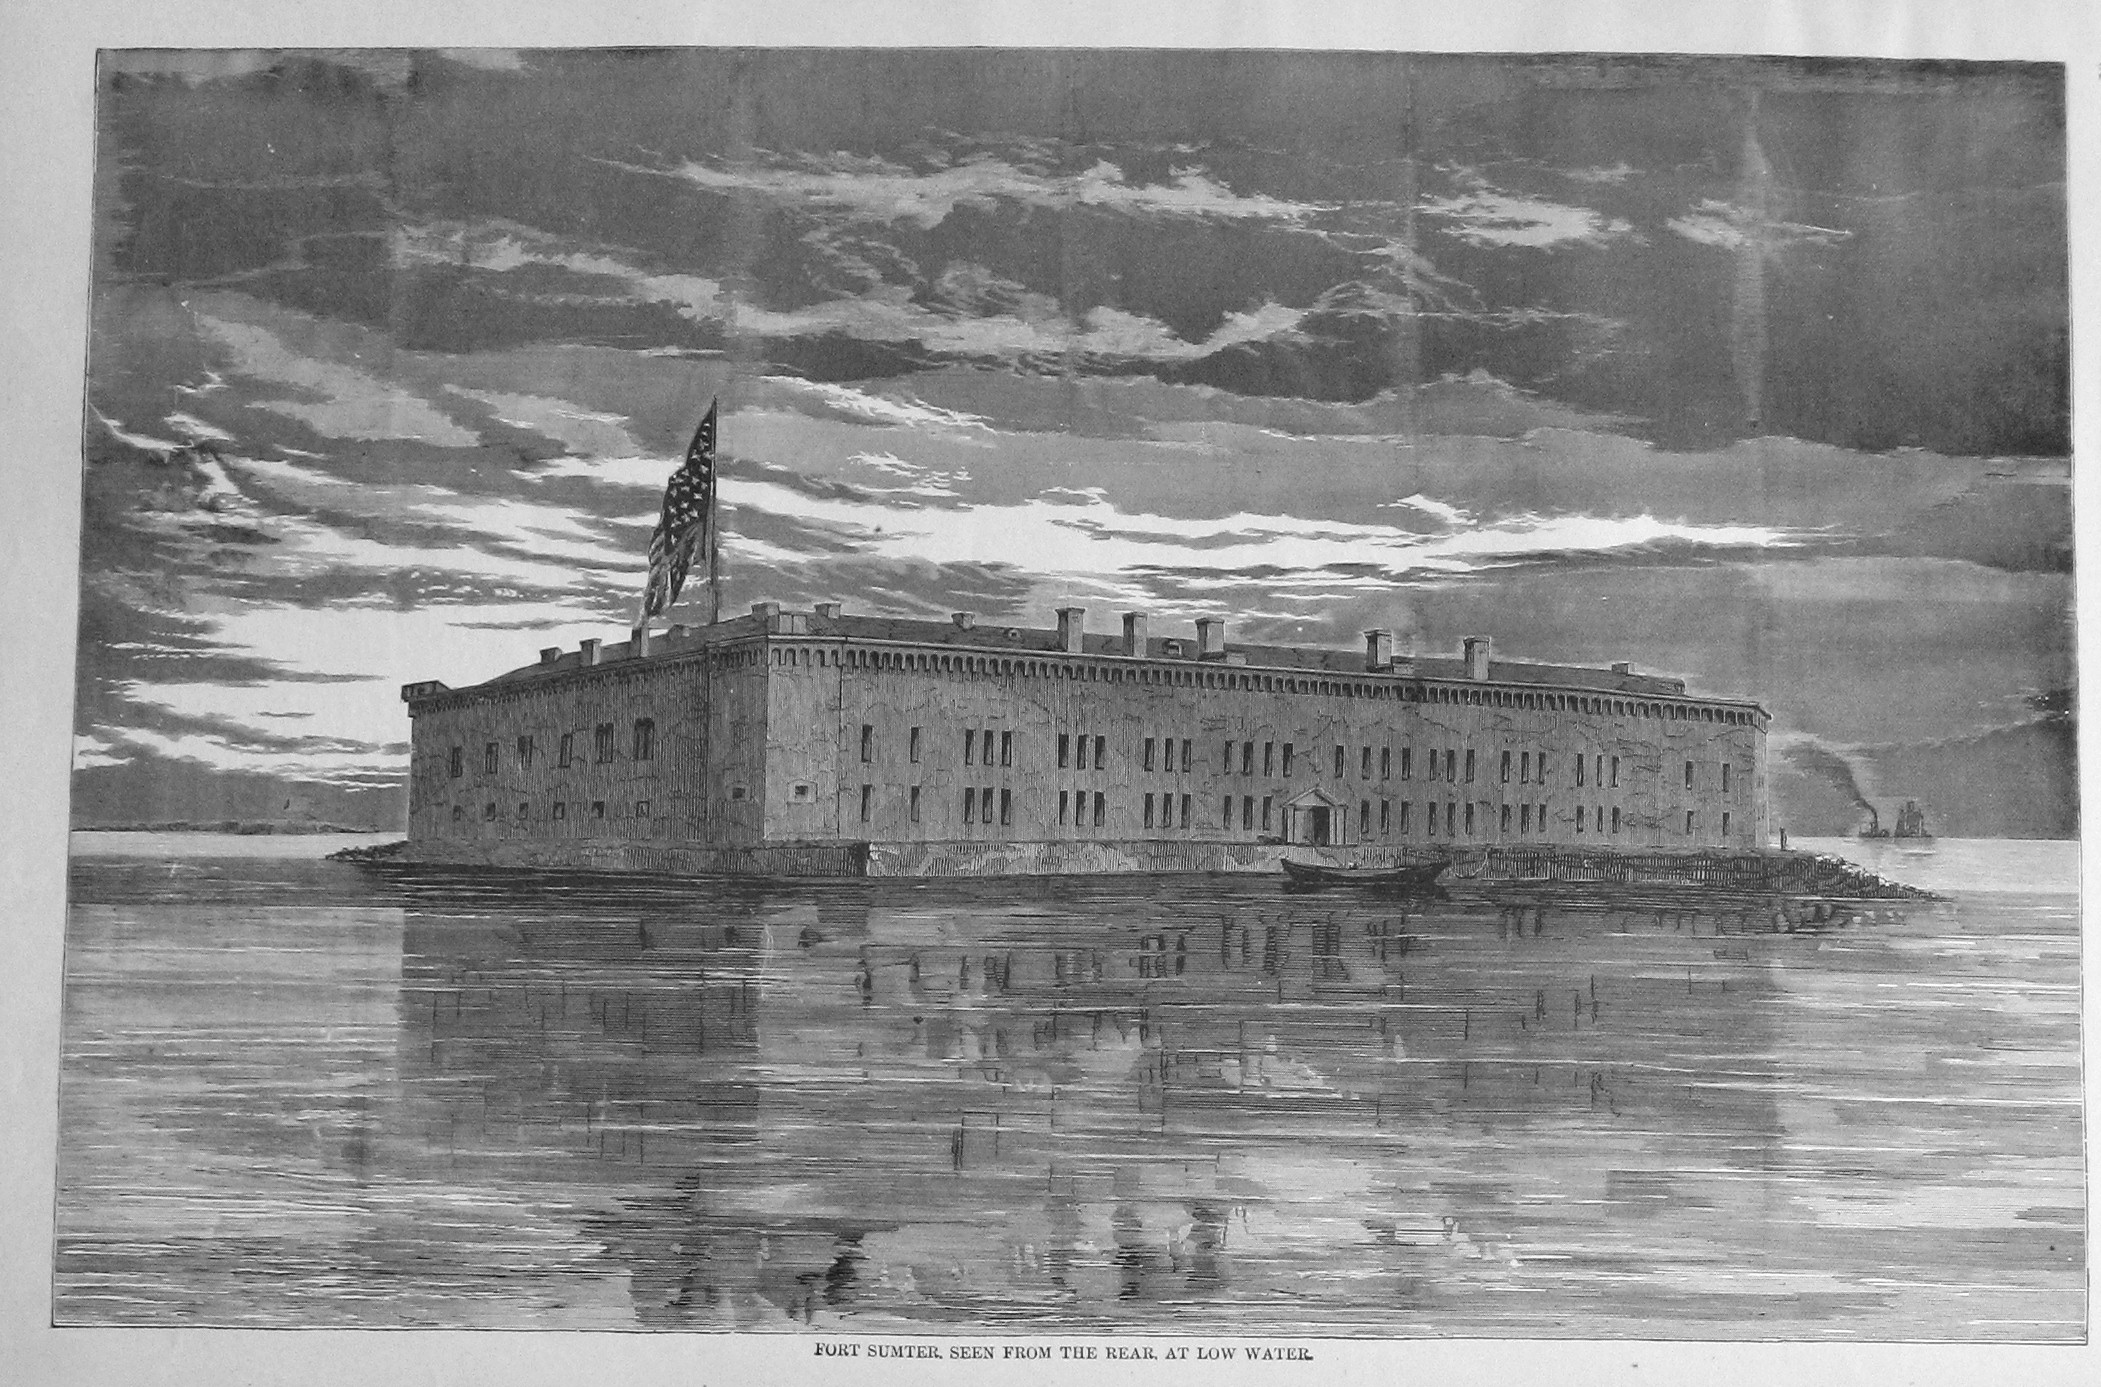 fort sumter rear low water